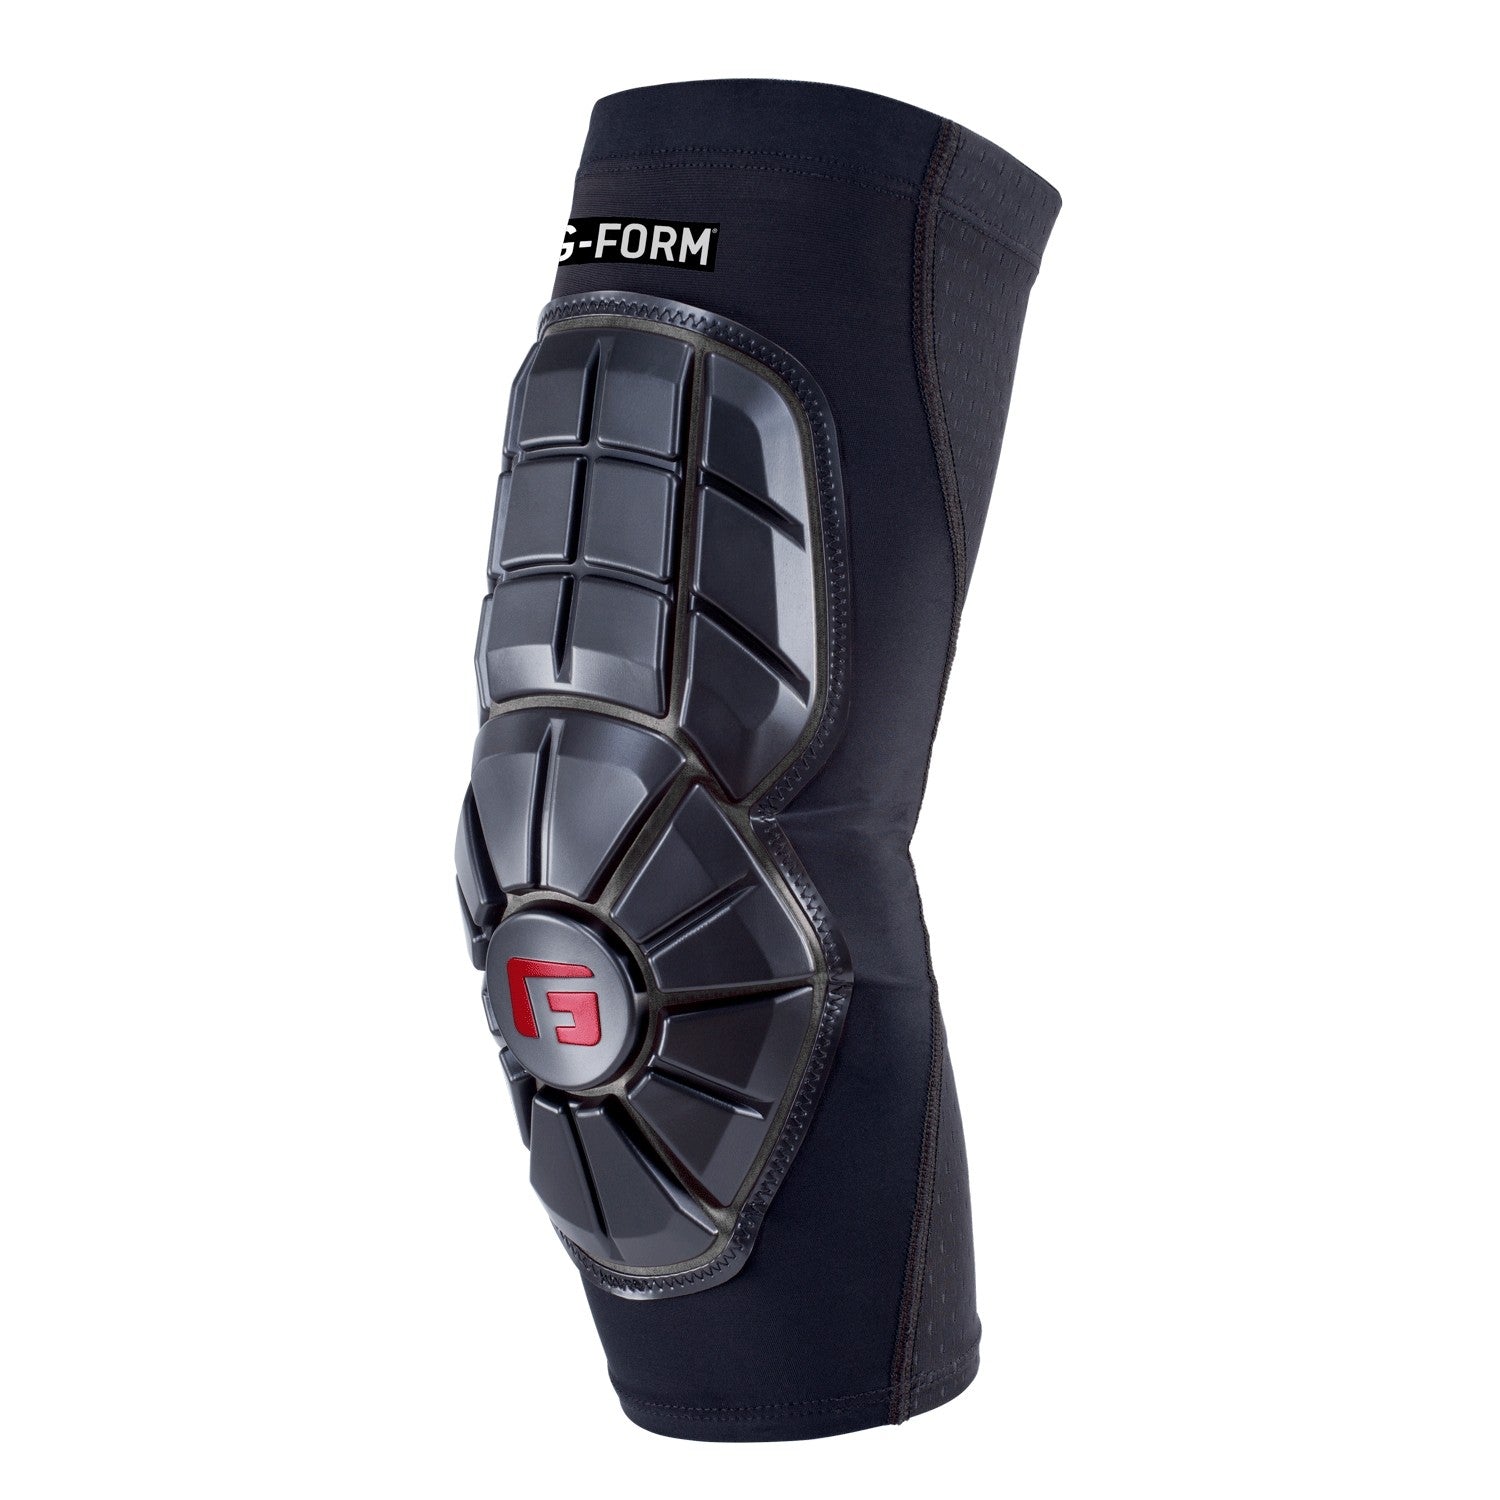 G-Form Pro Extended Elbow Guard